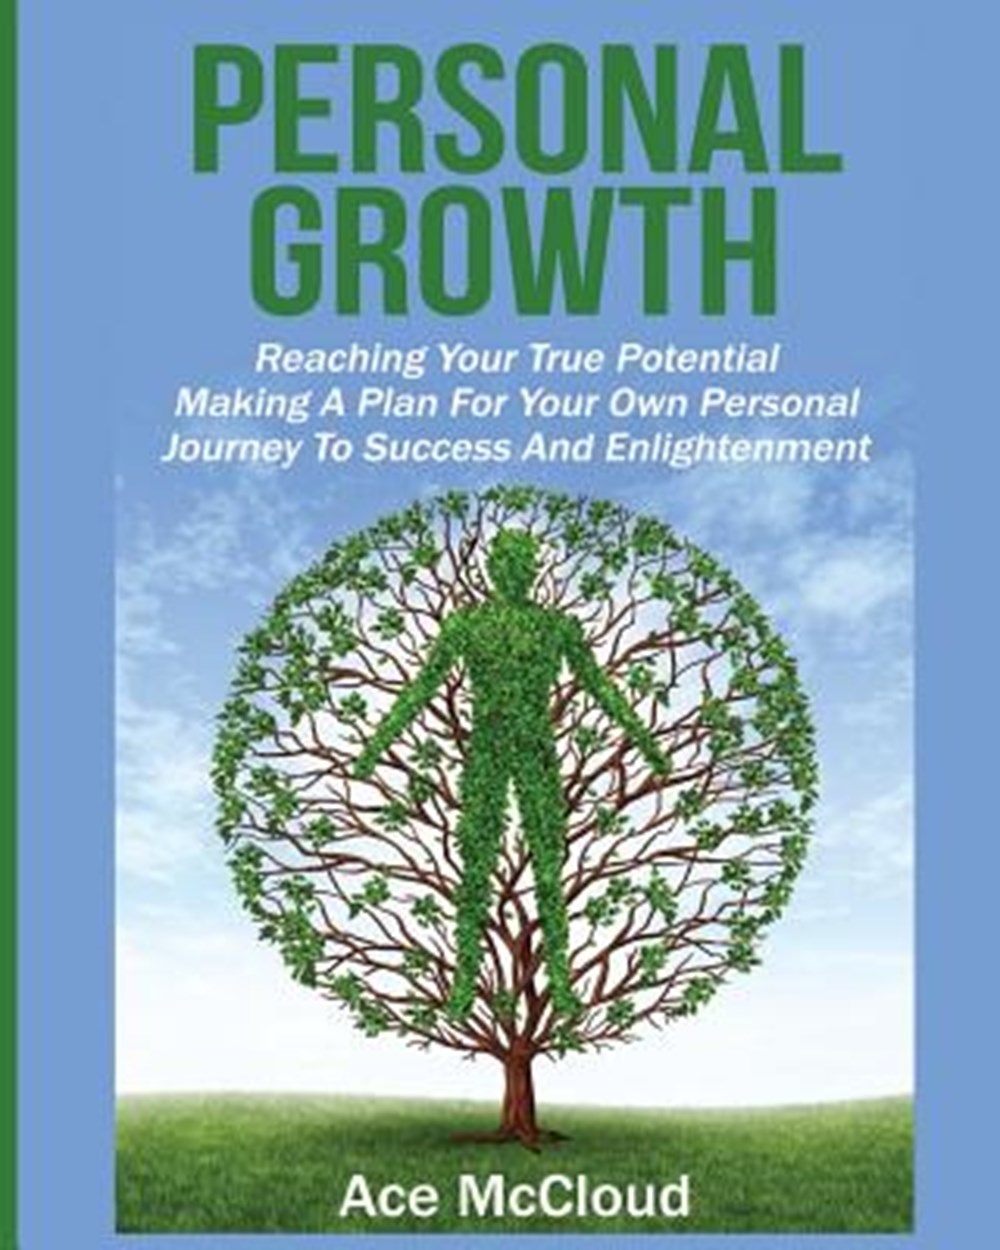 Personal Growth Reaching Your True Potential: Making A Plan For Your Own Personal Journey To Success